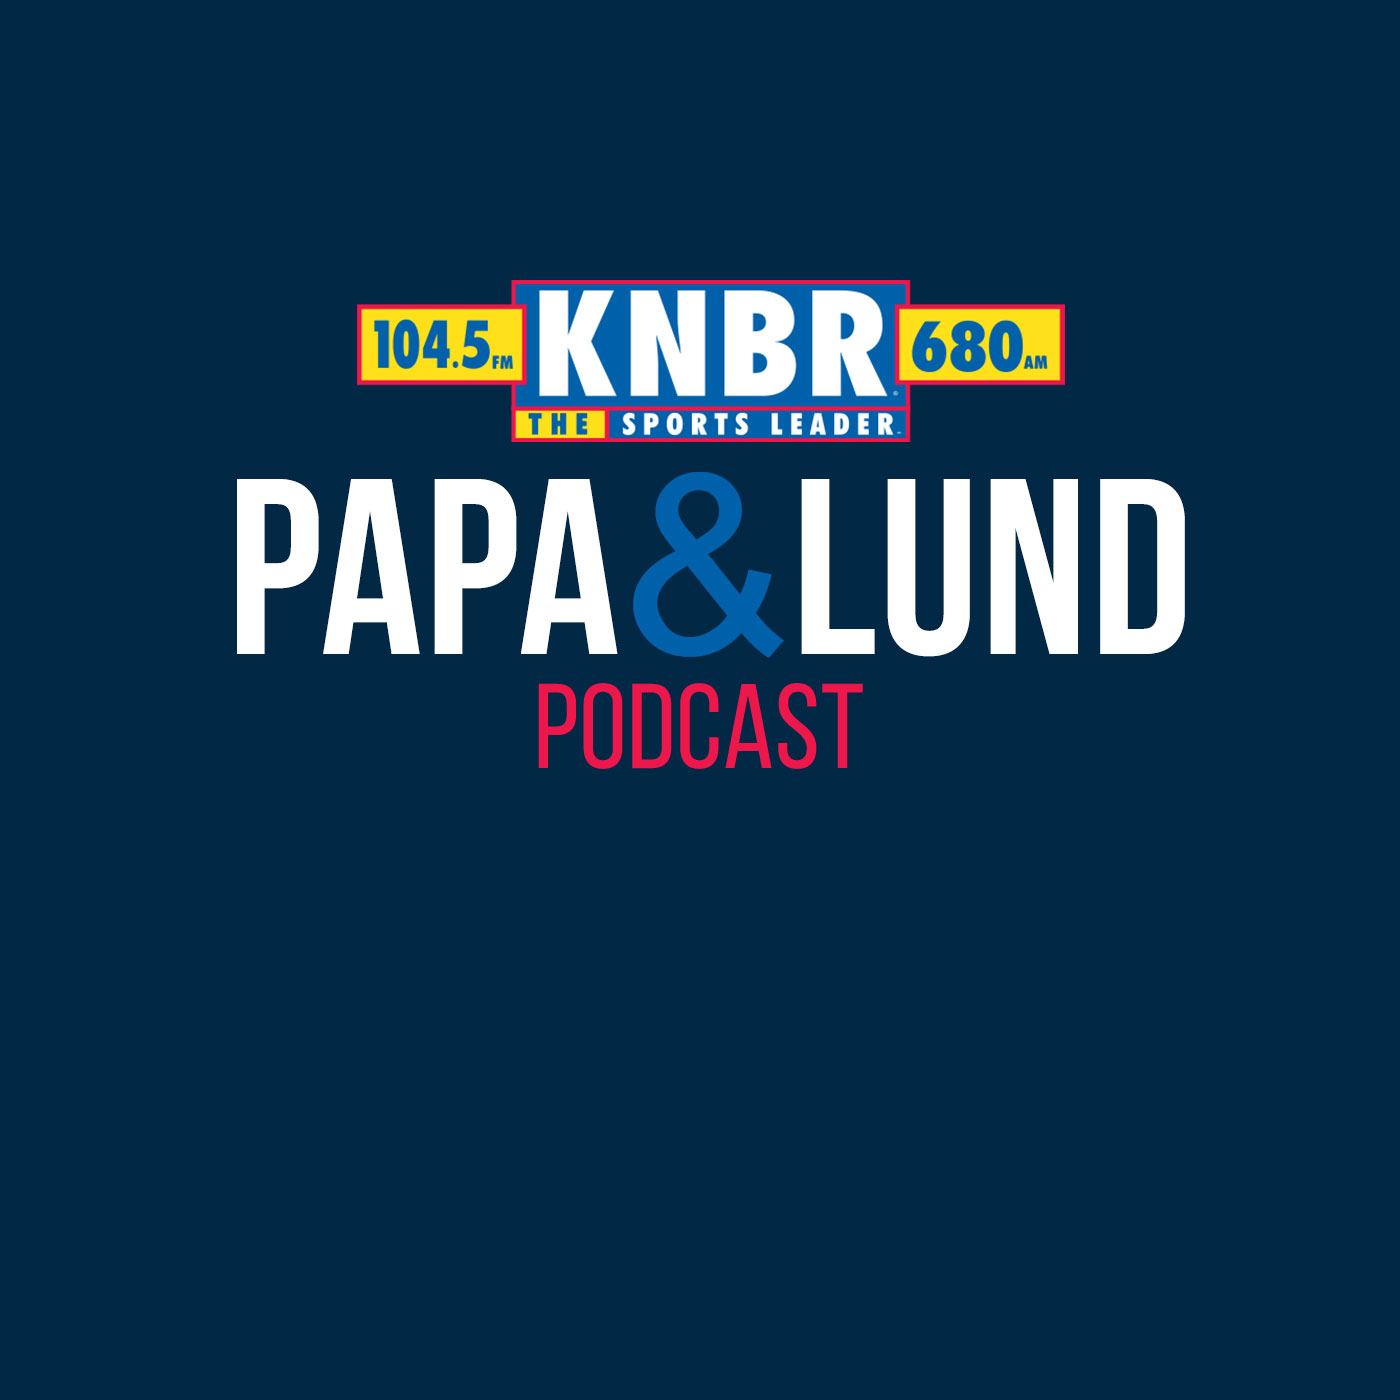 12-13 John Dickinson & Guy Haberman joins Papa & Lund to discuss their thoughts on the MVP race and who is more valuable to the 49ers between Brock Purdy or CMC